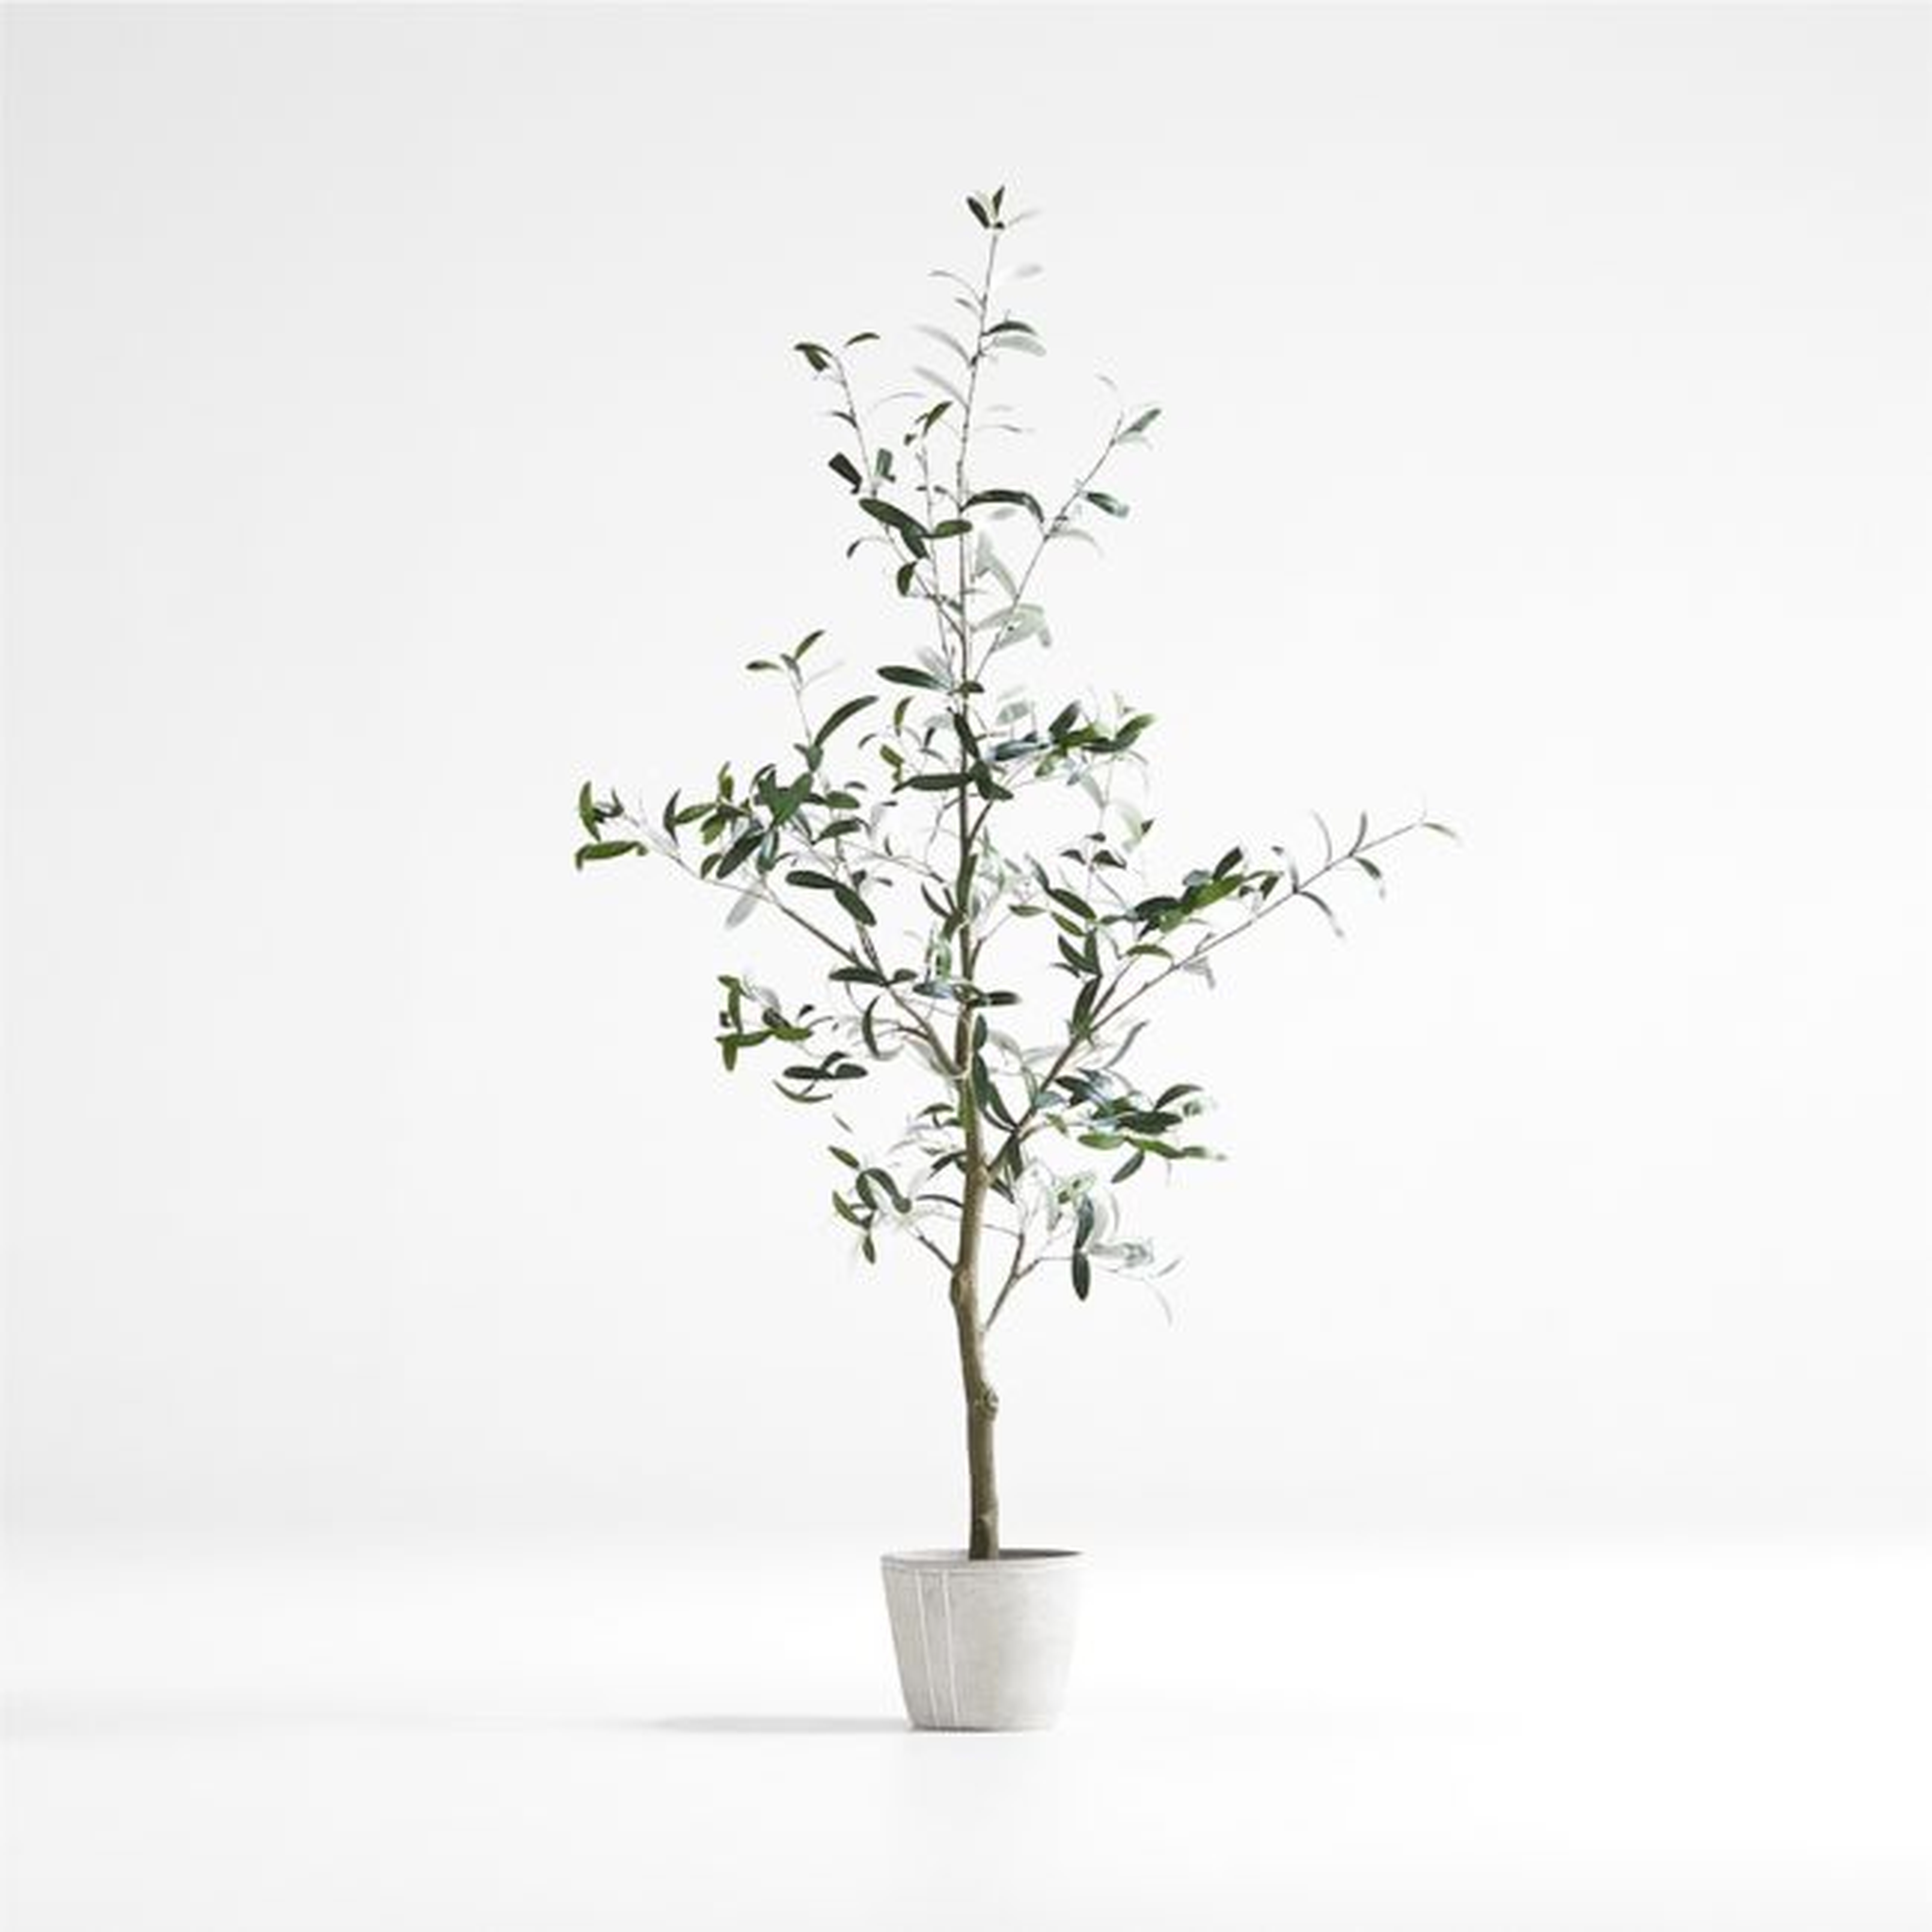 Faux Olive Tree in Pot 5' - Crate and Barrel